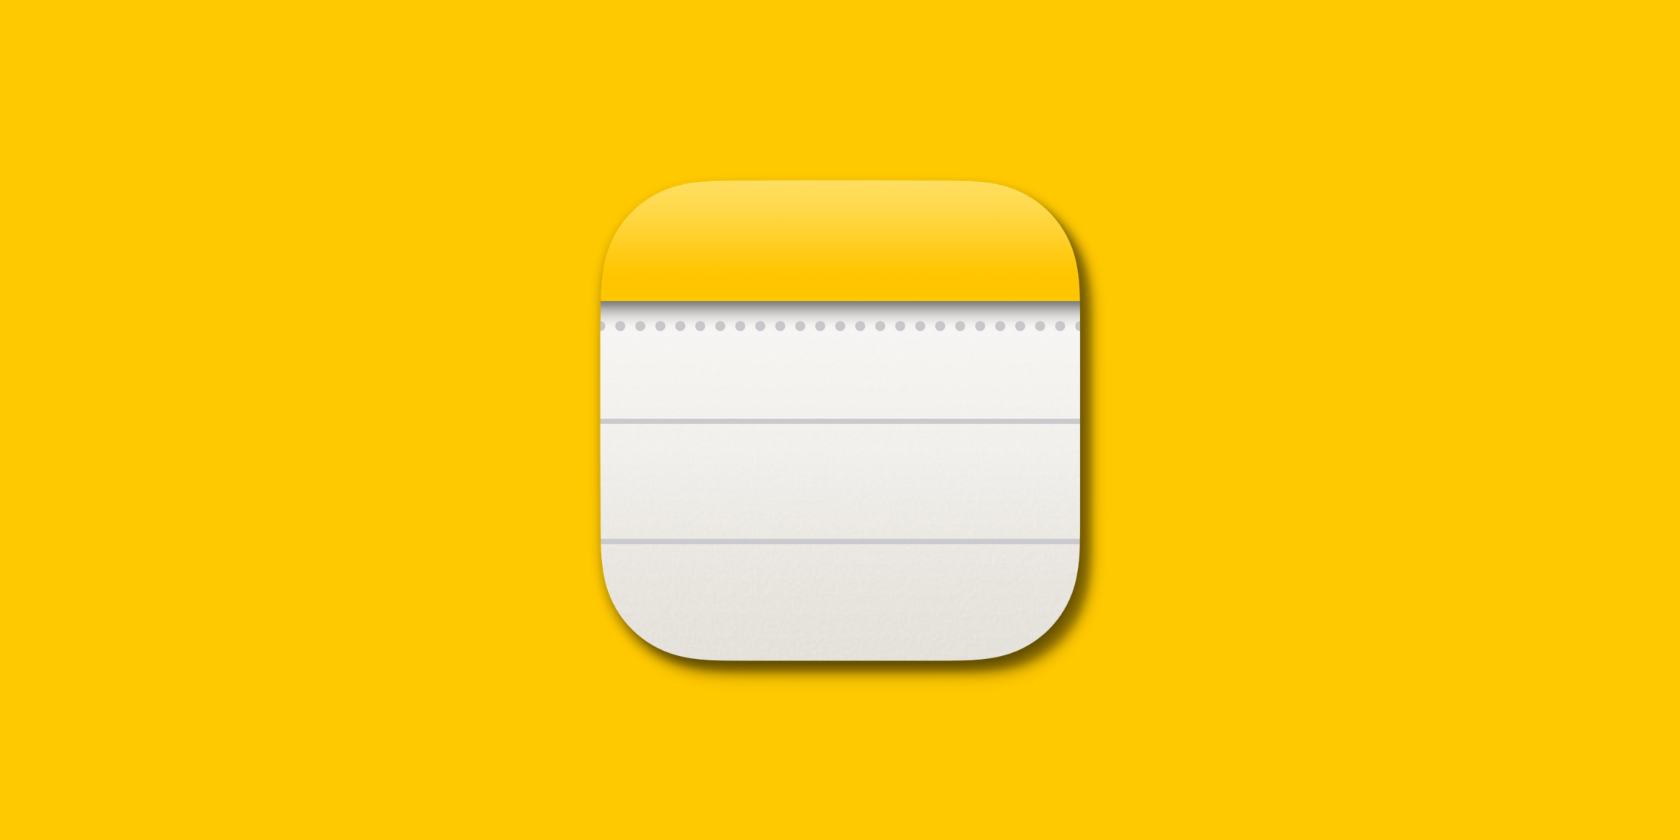 Iphone and mac notes app icon on a yellow background